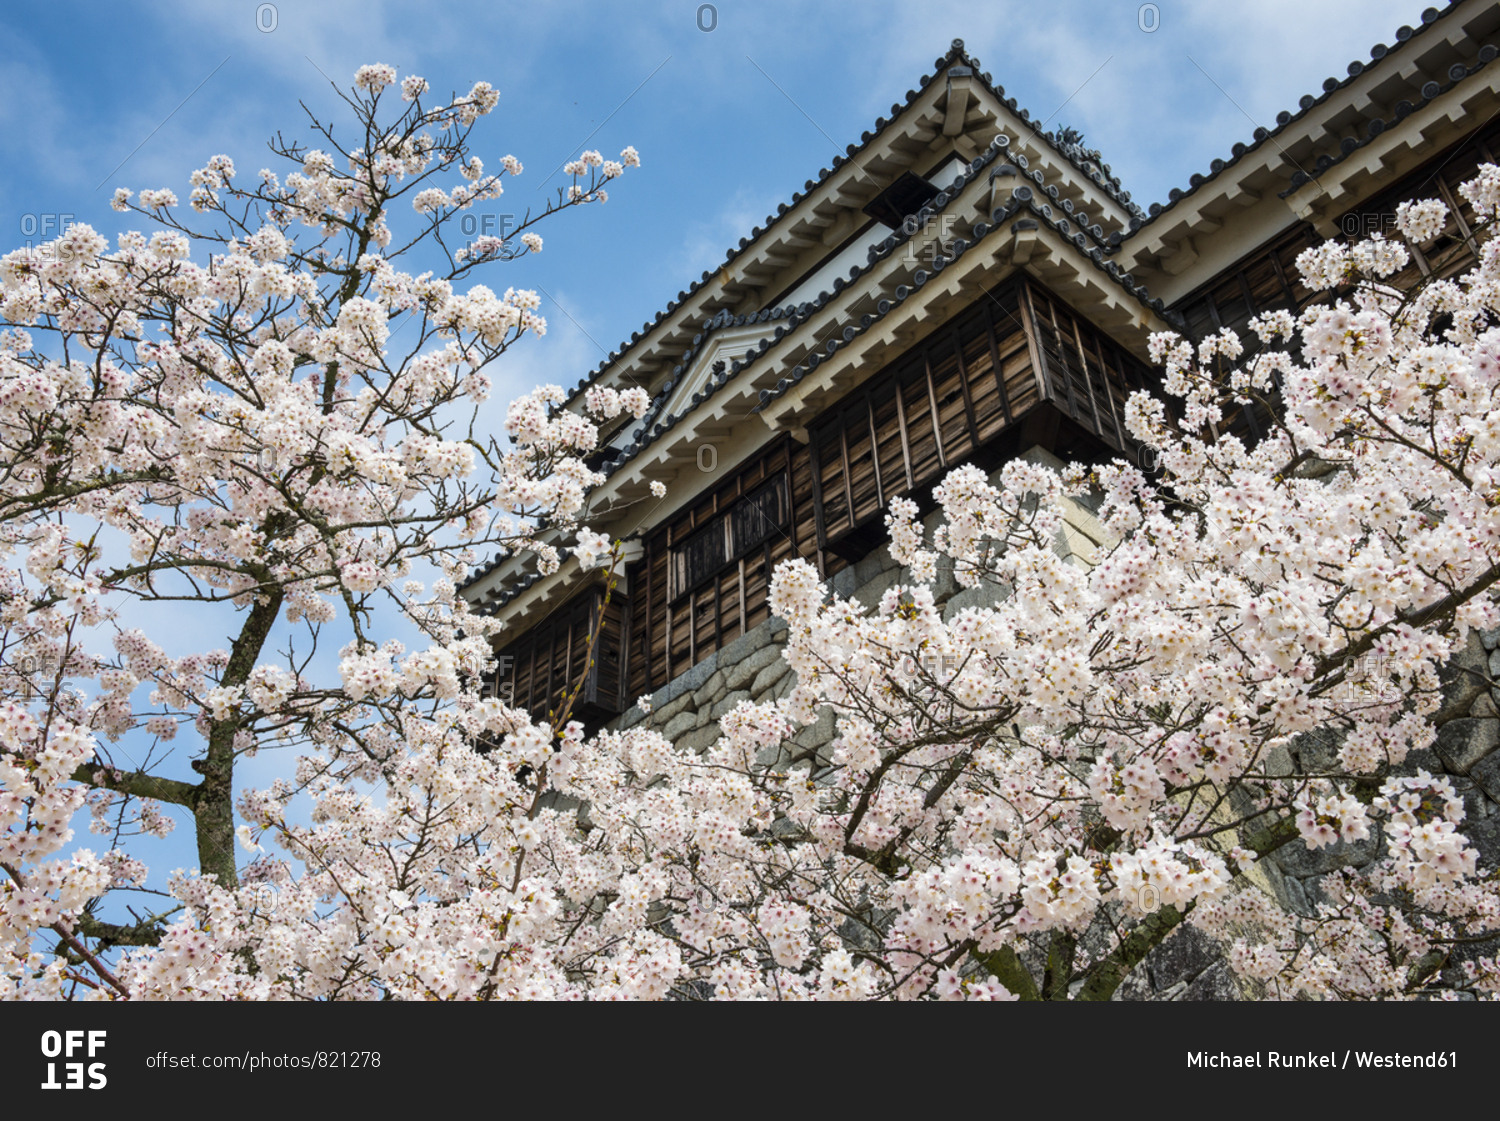 Japan- Shikoku- Matsuyama- view to Matsuyama castle with cherry blossoms in the foreground